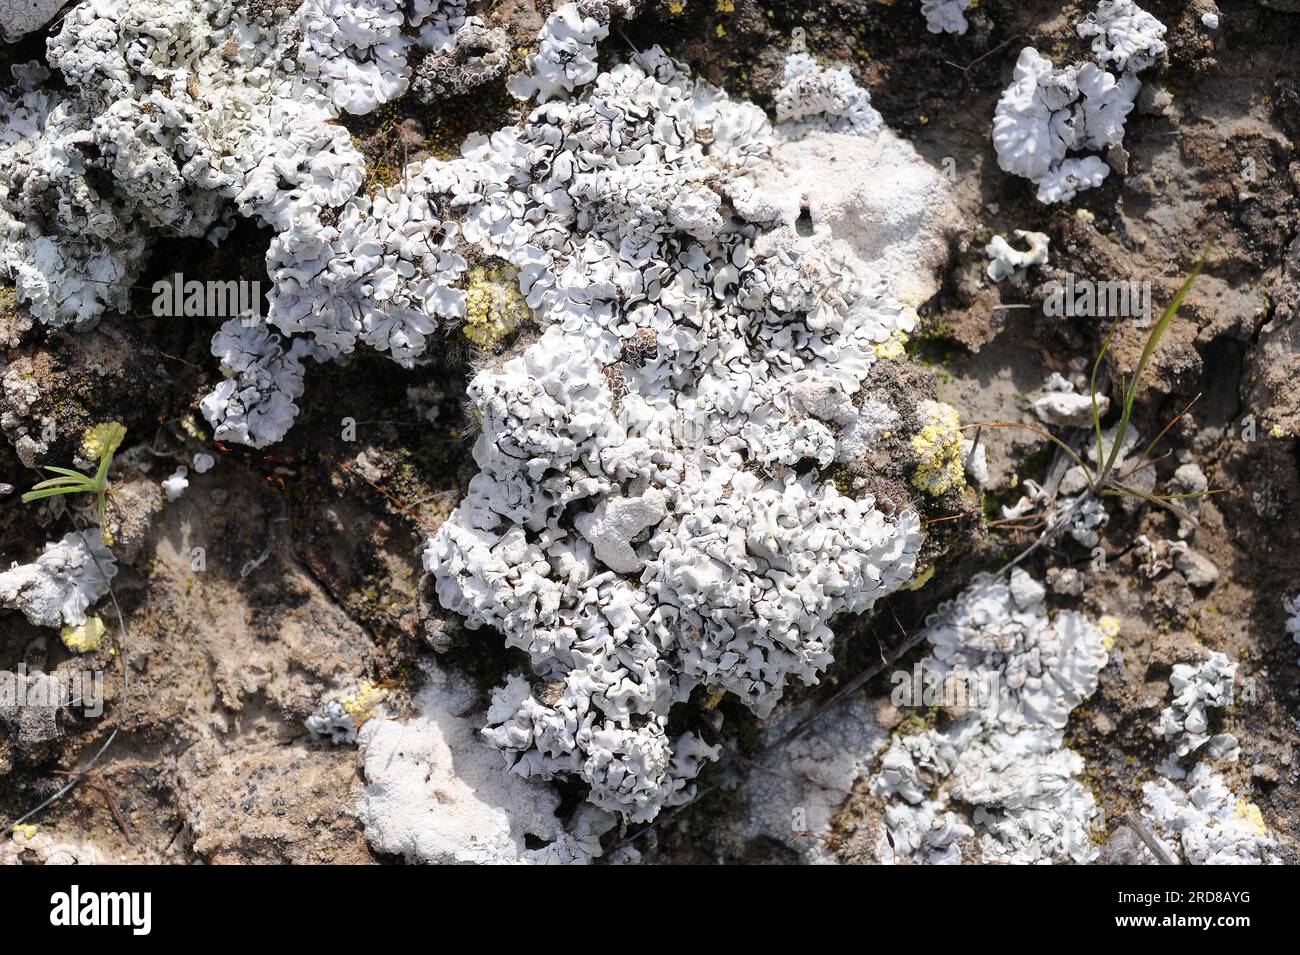 Buellia zoharyi is a crustose lichen that grows in arid regions of the Mediterranean bassin. Fungi. Ascomycota. This photo was taken in Tabernas Deser Stock Photo